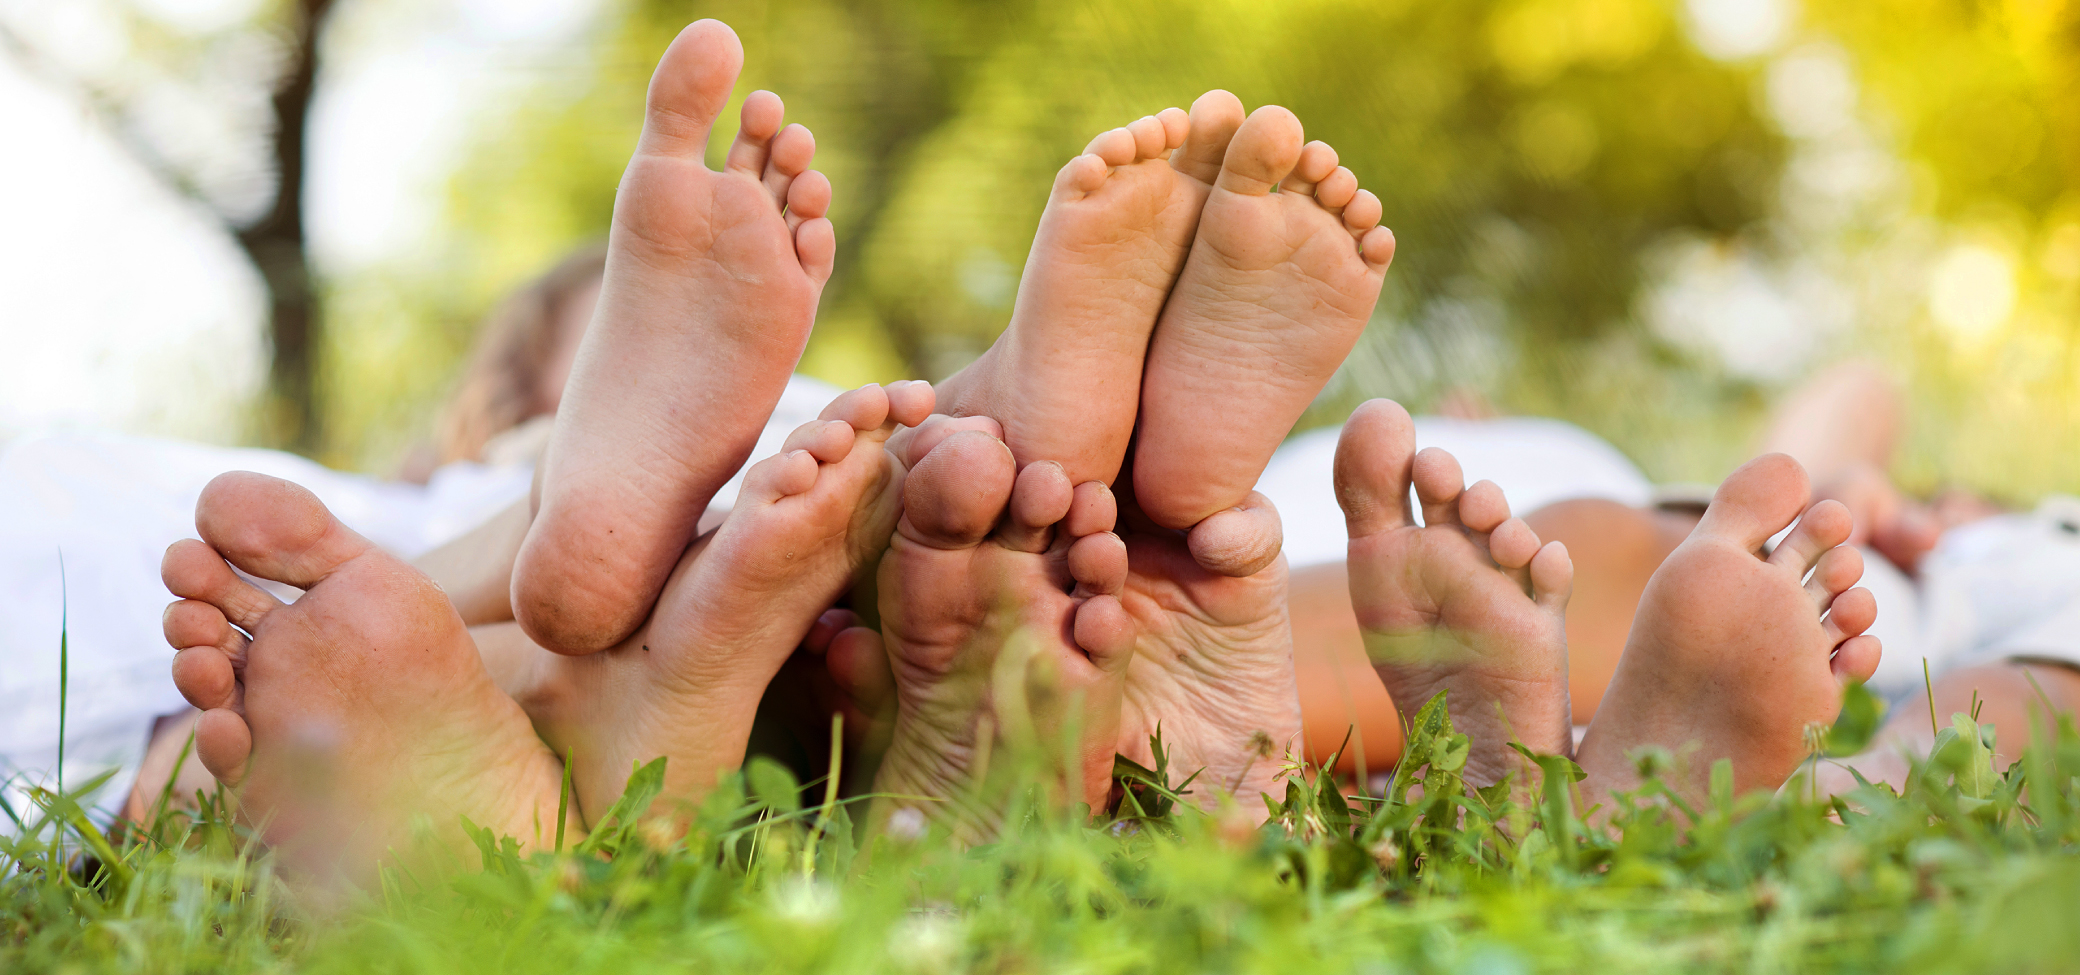 A family of bare feet on grass